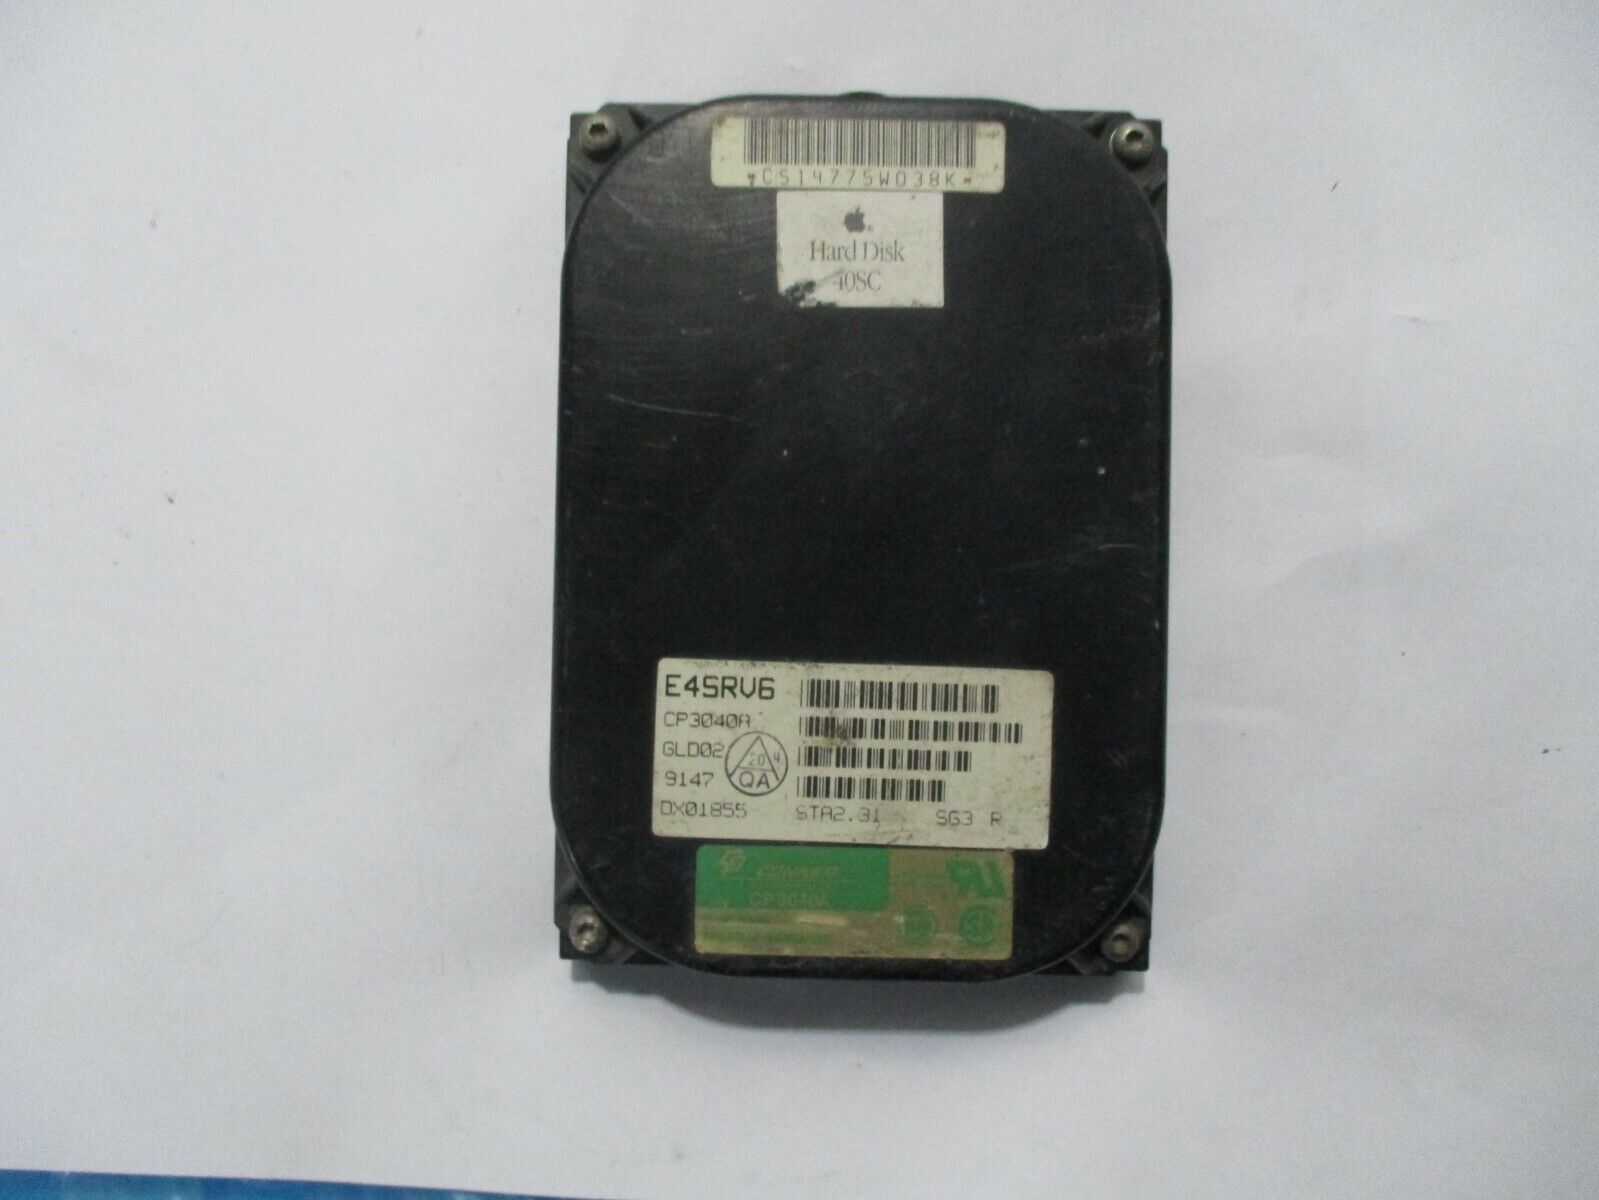 Conner CP3040A 40MB 50-Pin SCSI Hard Drive